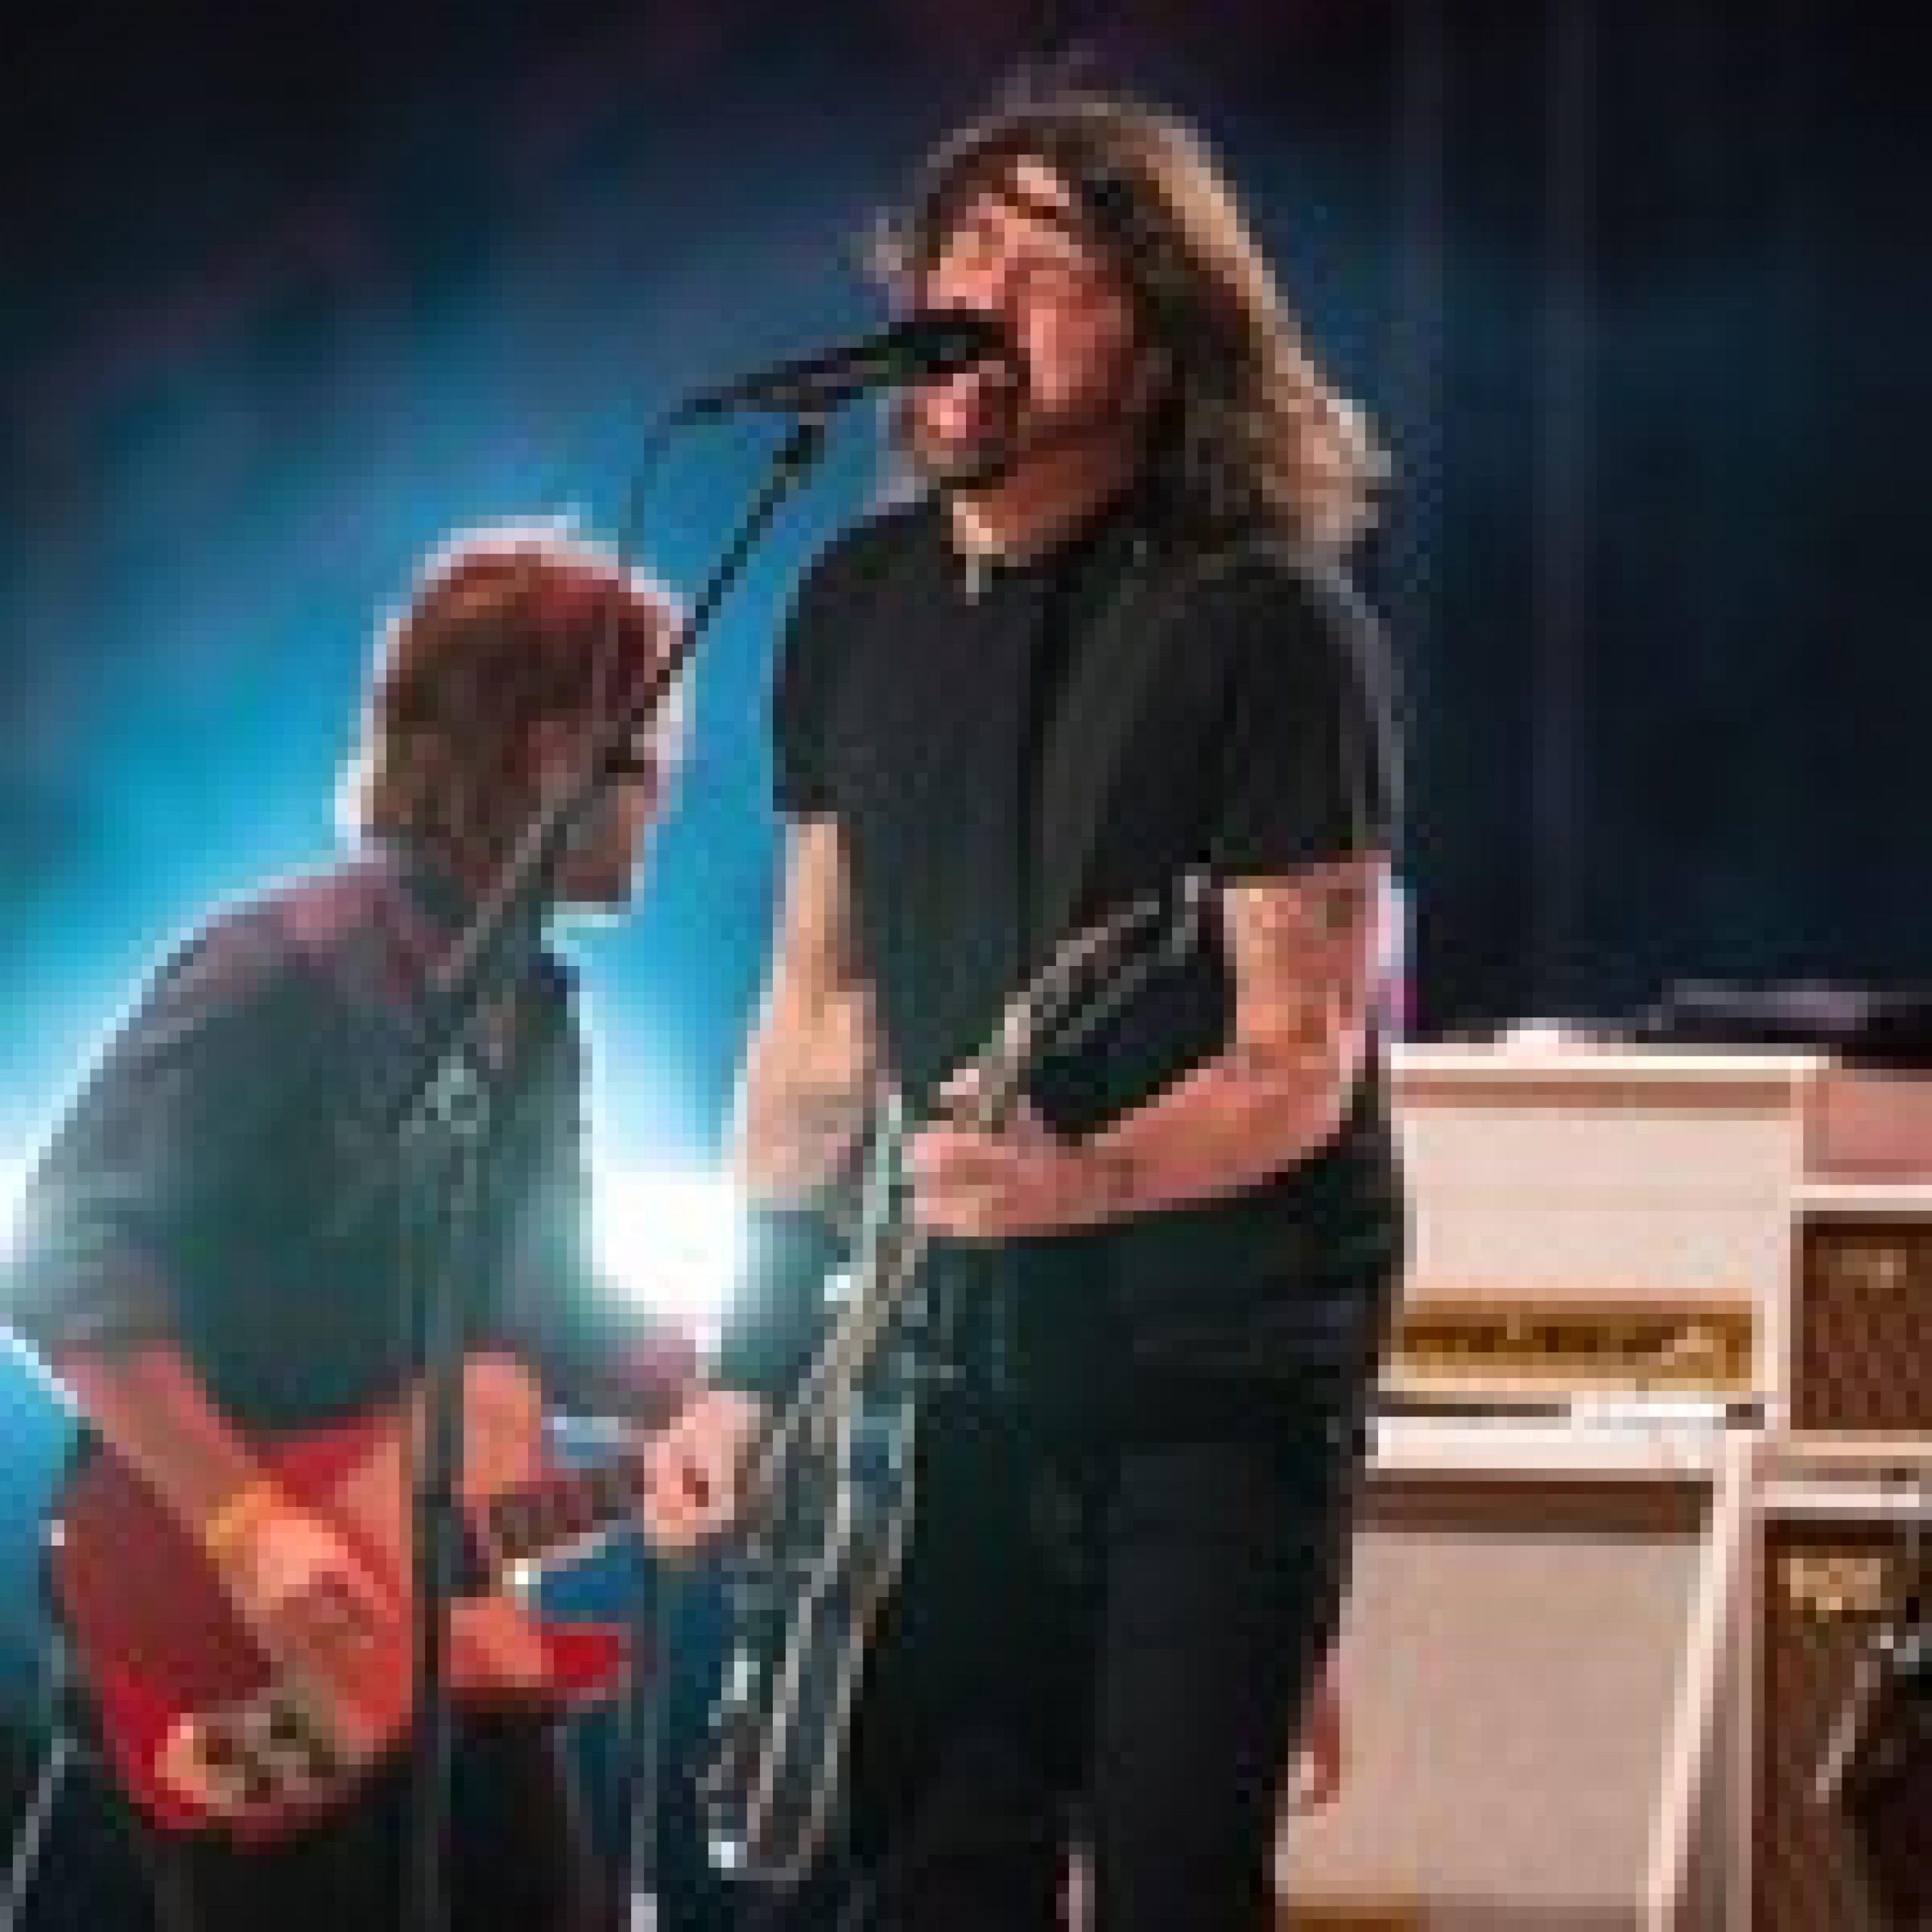 Foo Fighters Concert Protested by Anti-Vaccine Activists, Including Ricky Schroder